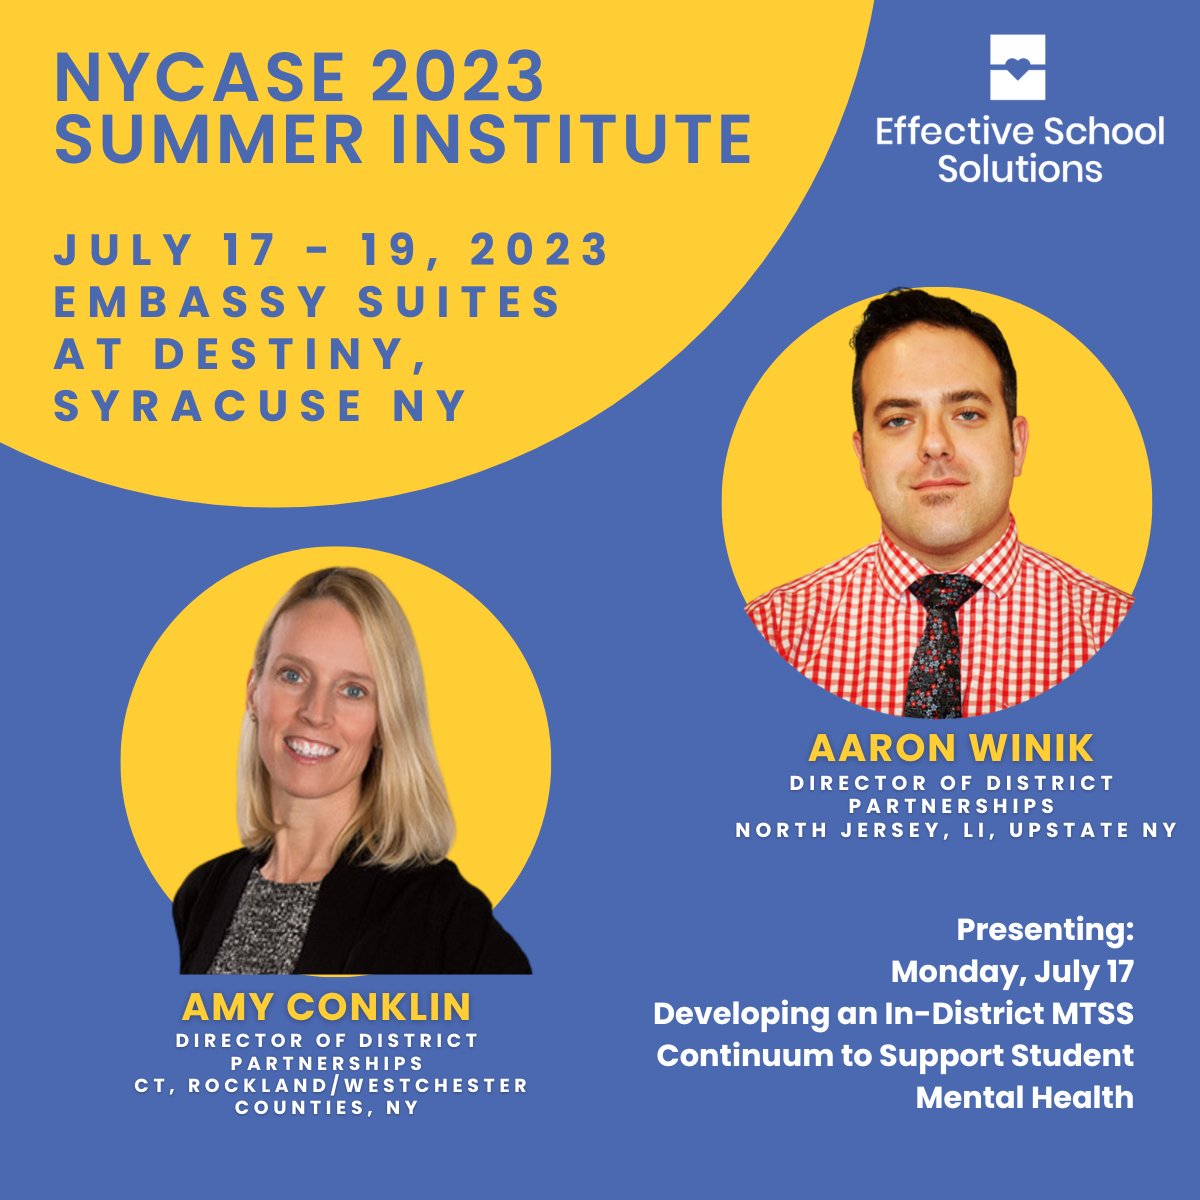 Excited to be part of the transformative 2023 Summer Institute from July 17 - 19 at Embassy Suites in #syracuseny! 🌟Two of our Directors of District Partnerships @amyconklin and @aaronwinik will be joining special education leaders and educators at the @NY_NYCASE  Summer…